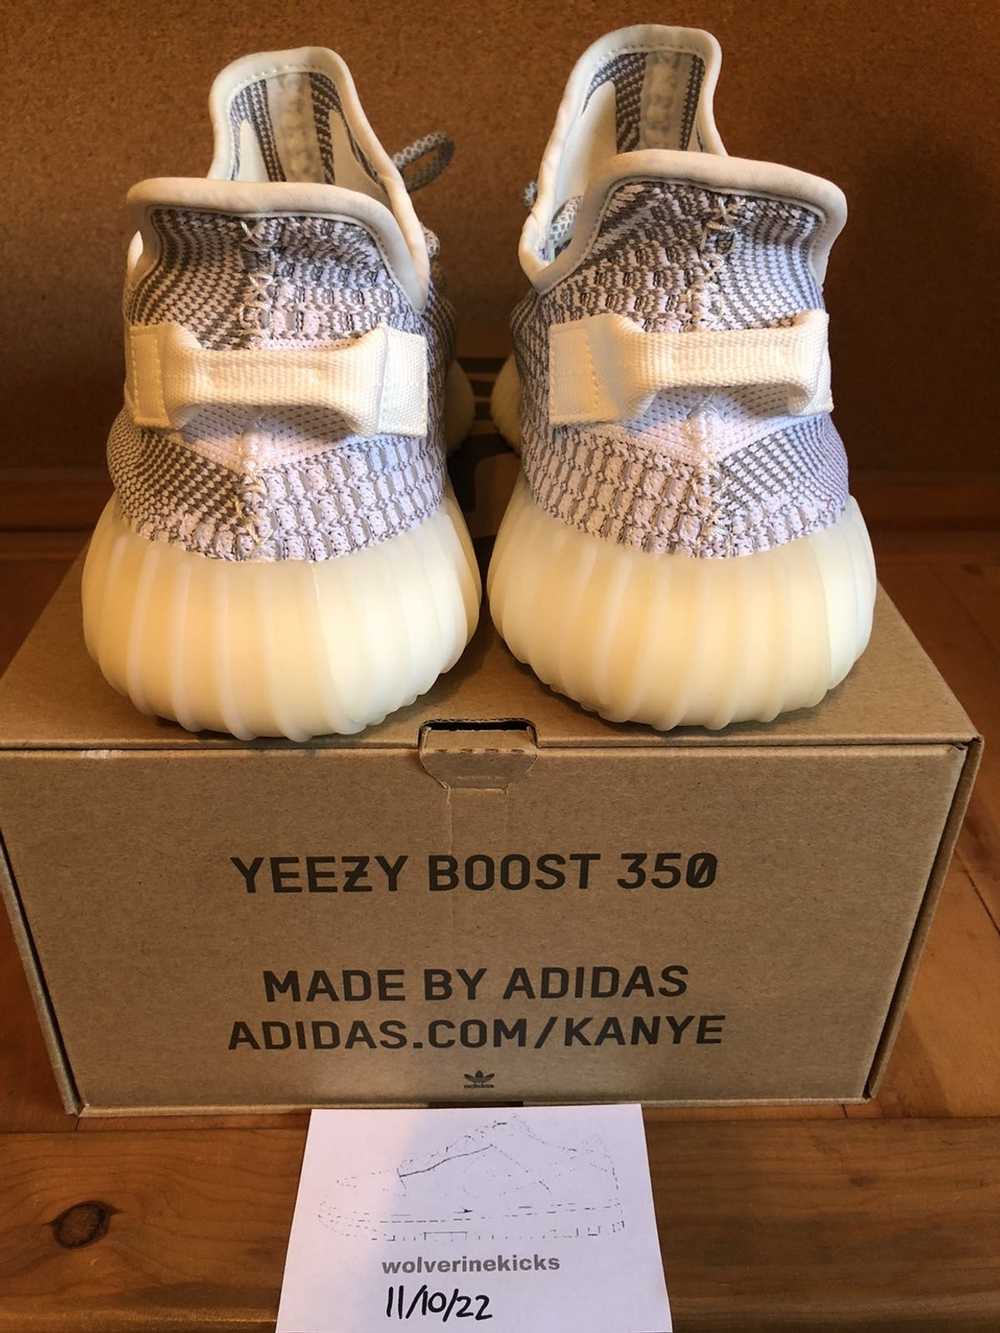 Adidas Yeezy Boost 350 V2 Static Non-Reflective - image 2